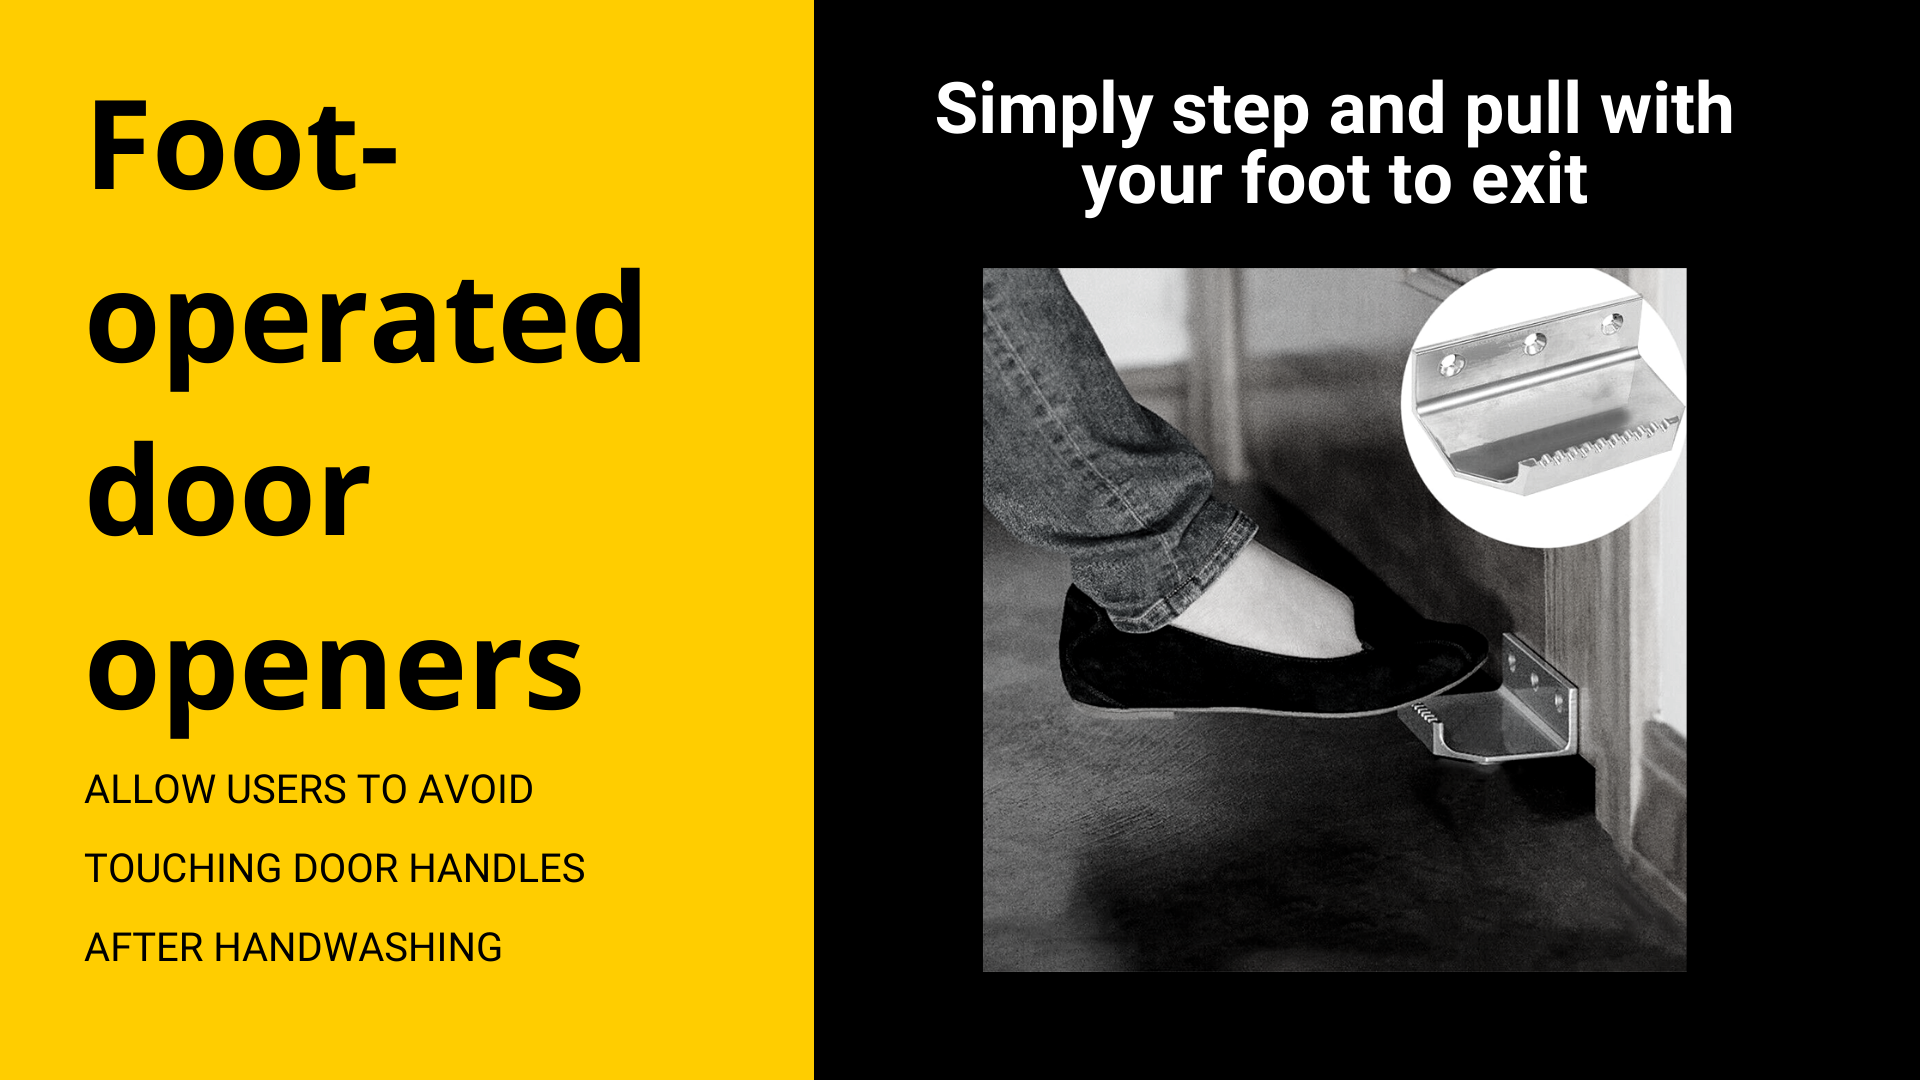 Step and pull with your foot to use foot-operated door openers